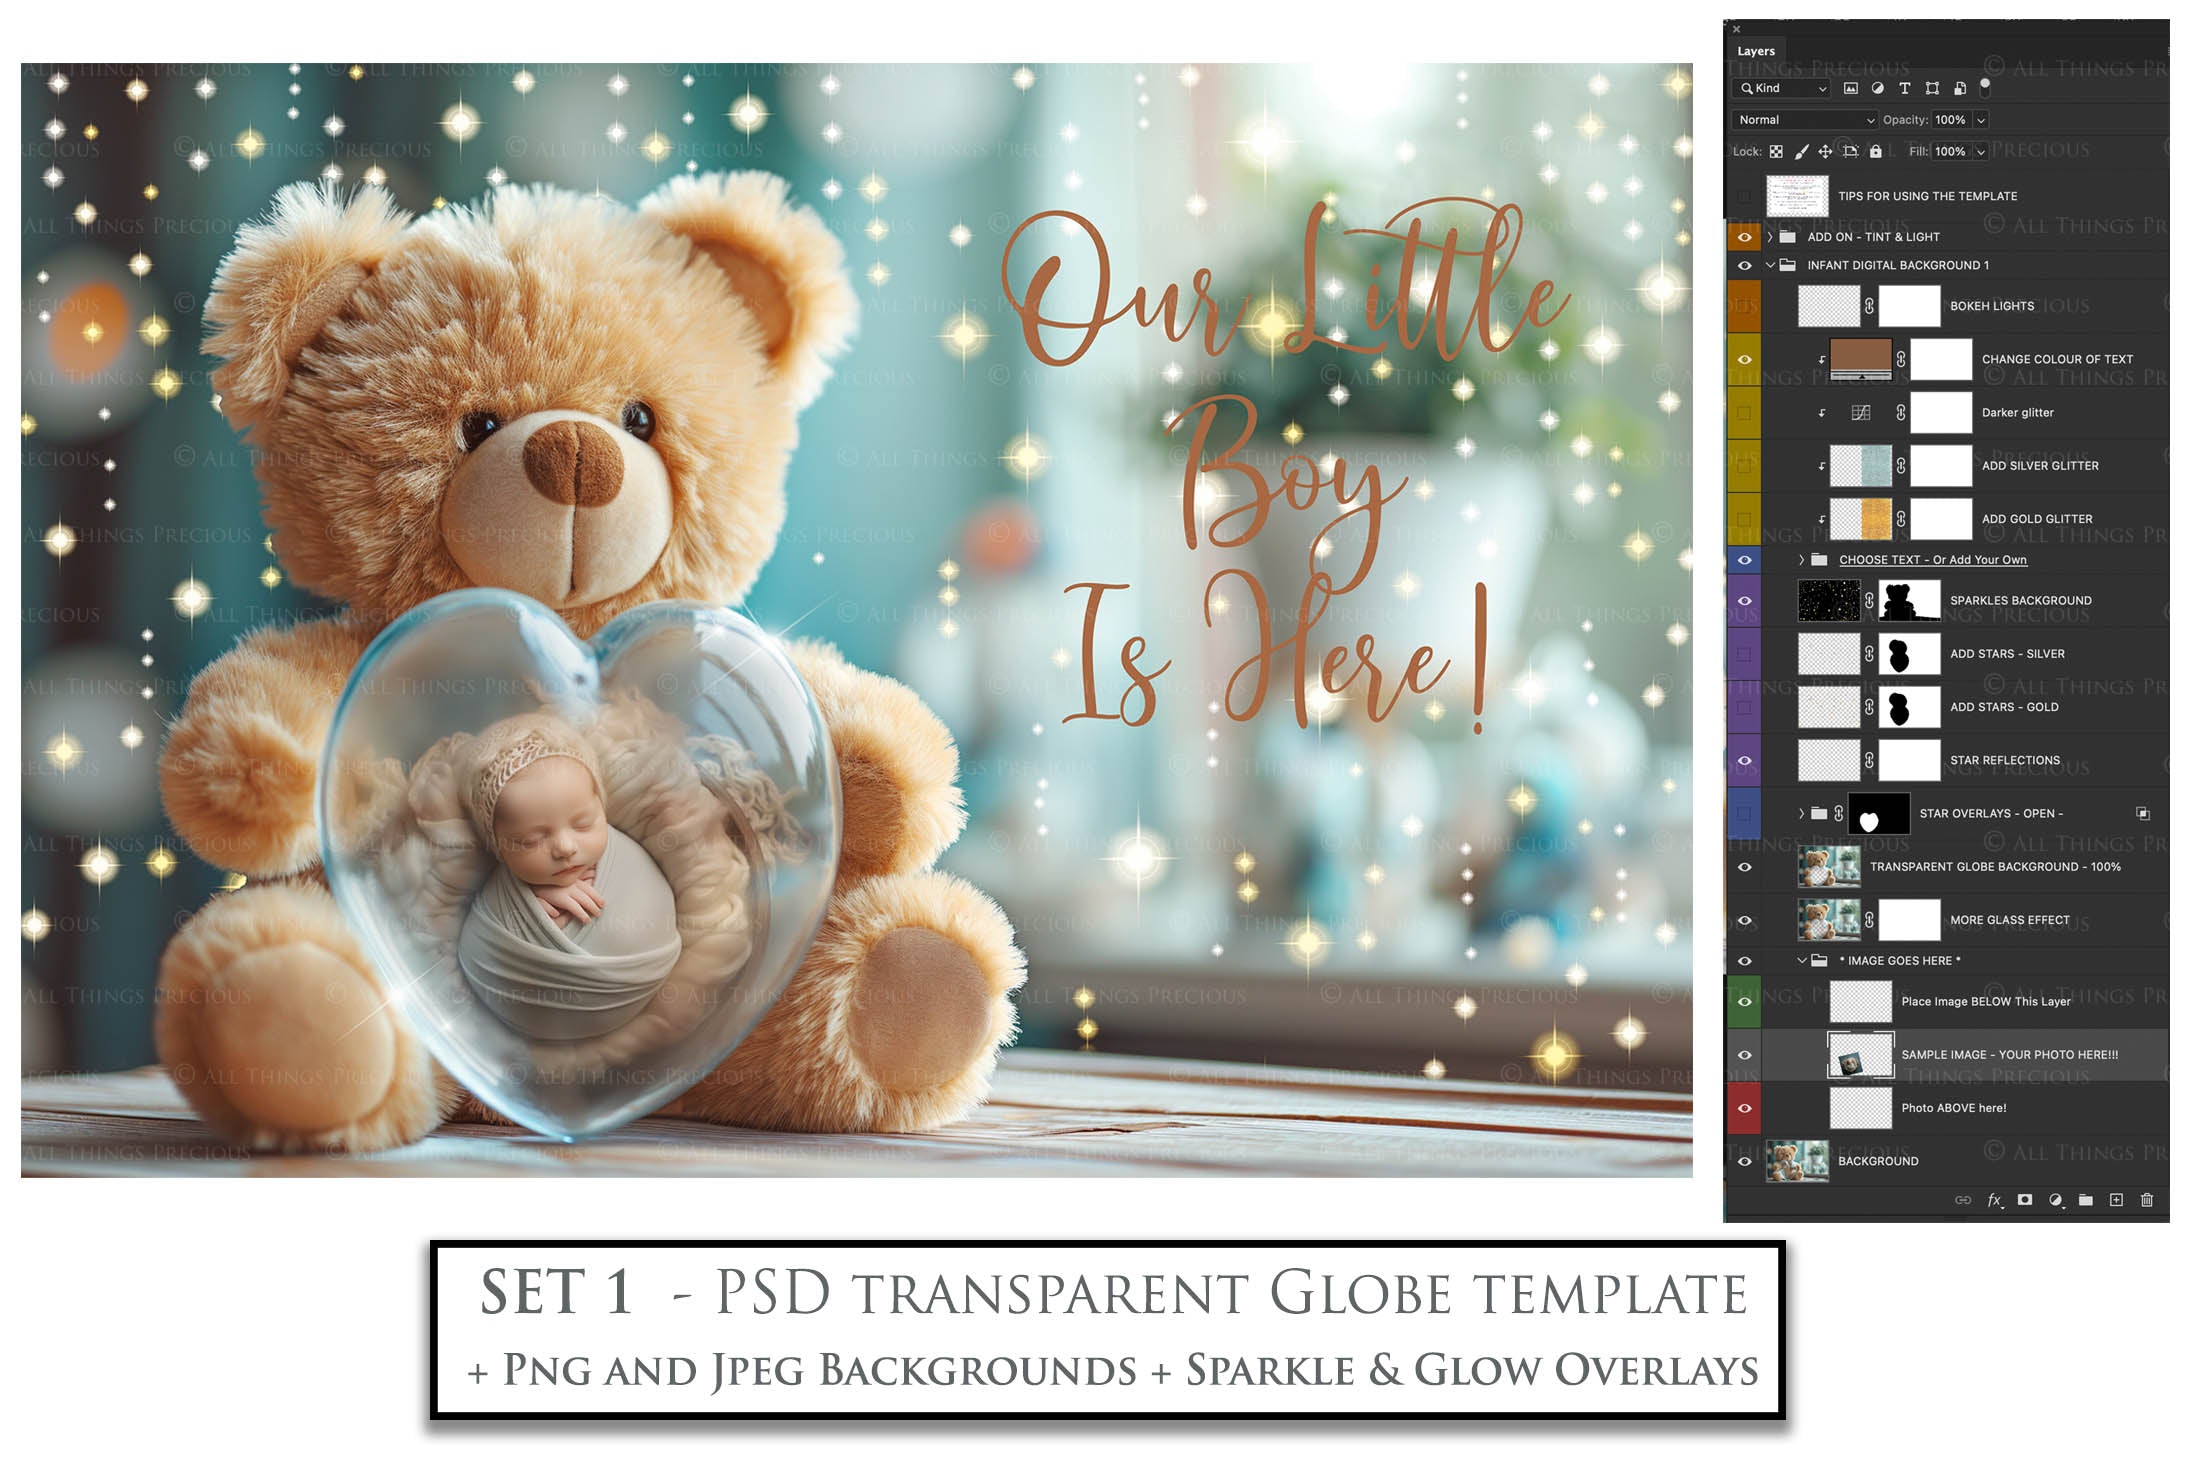 Newborn, Baby, Infant Announcement PSD template and Overlays. Digital Background, with Glows and petals. The heart shaped globe is transparent, perfect for you to add your own images and retain the glass globe effect.This file is 6000 x 4000, 300dpi. Photography, Scrapbooking, Png, Jpeg, Psd. ATP Textures.